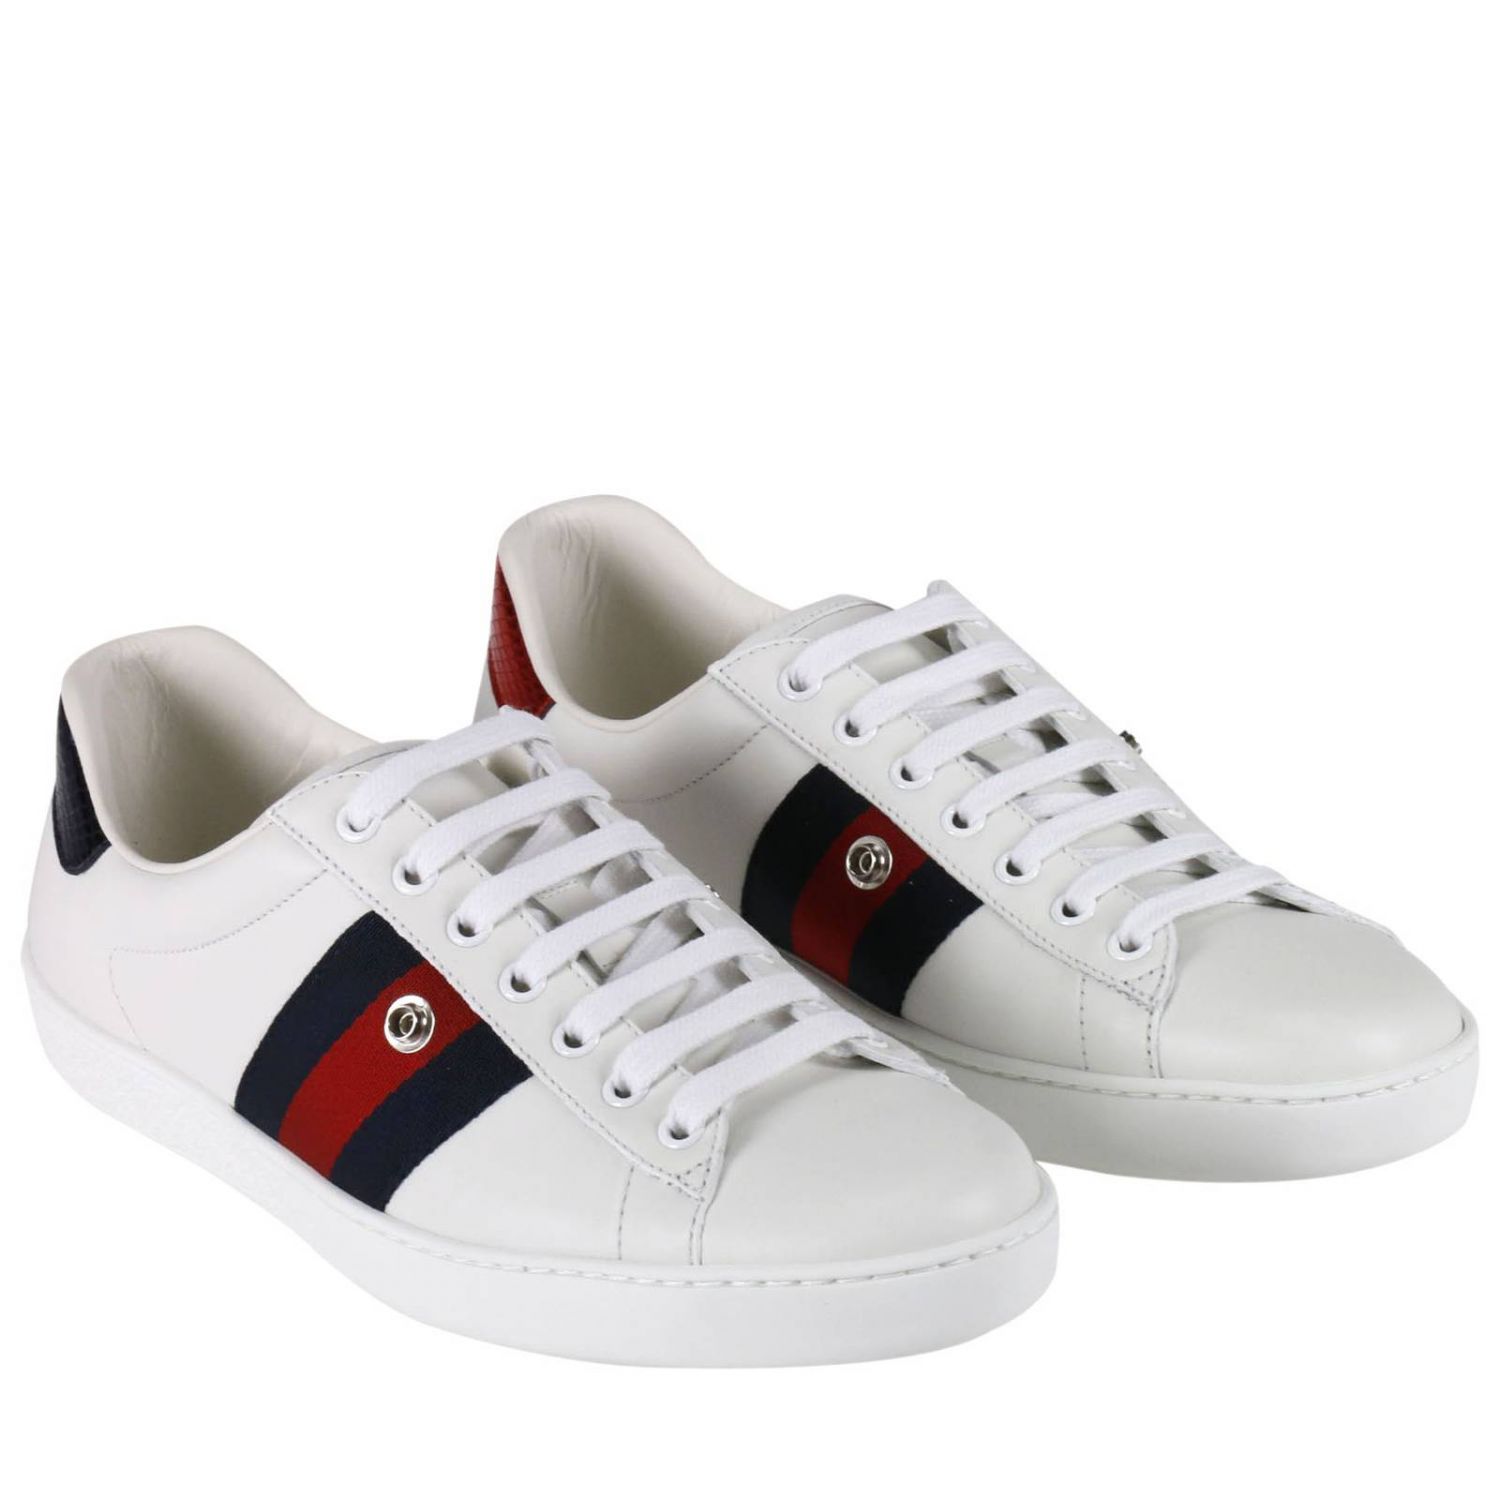 gucci sneakers removable patches